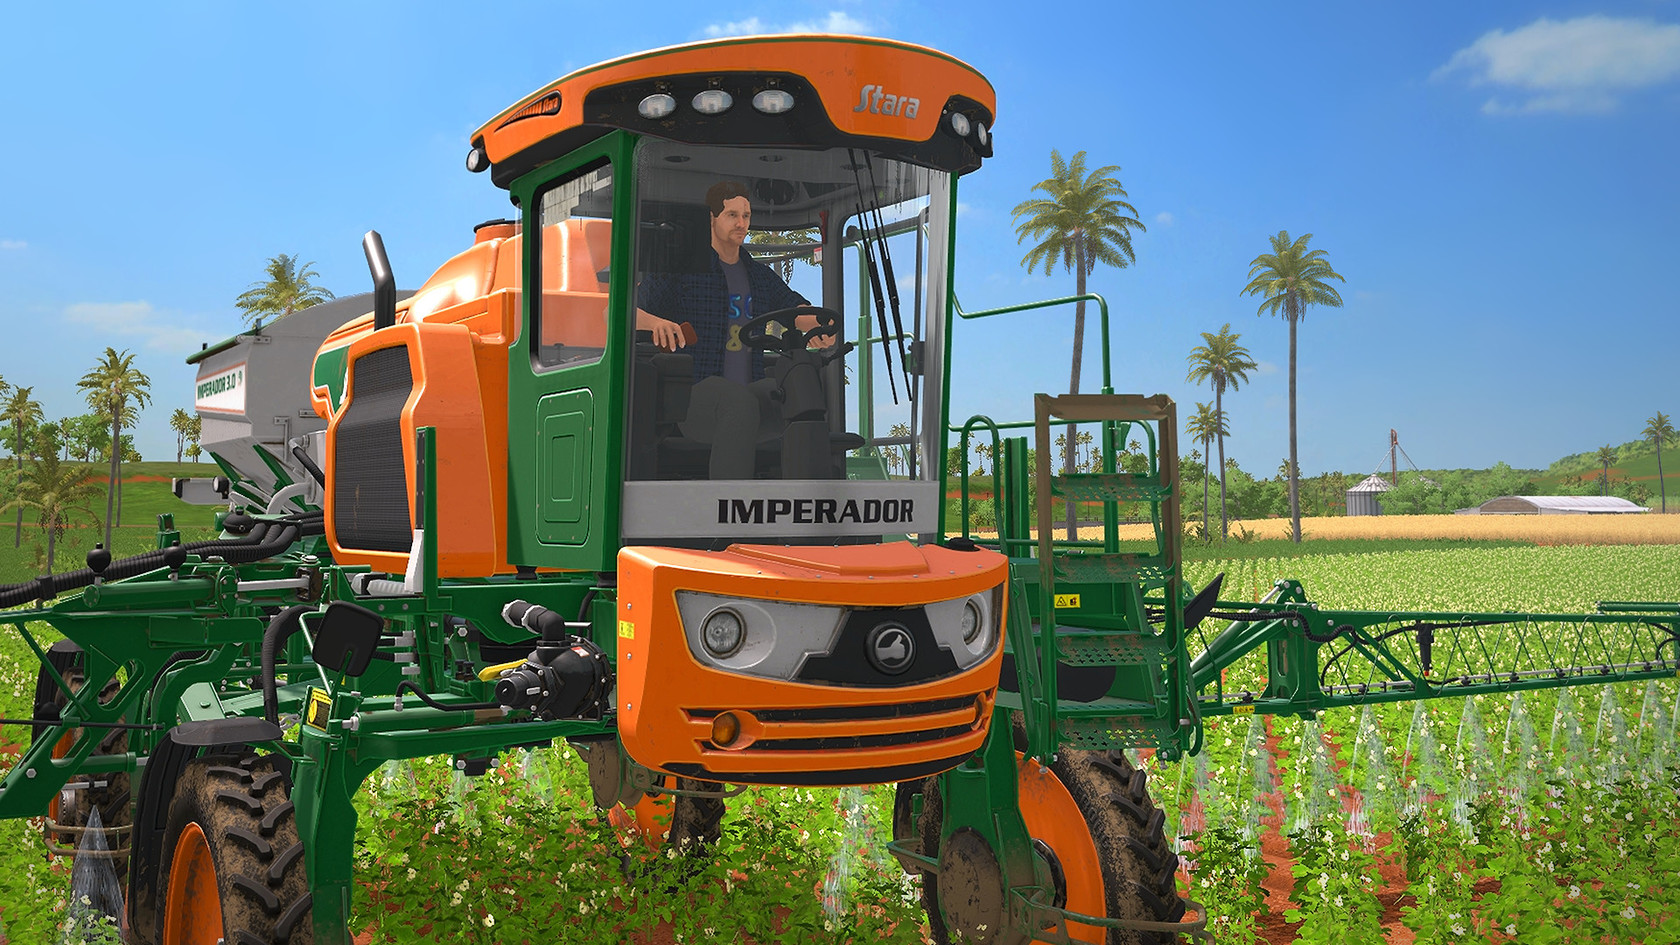 Farming Simulator 22 Platinum Edition and Expansion Officially